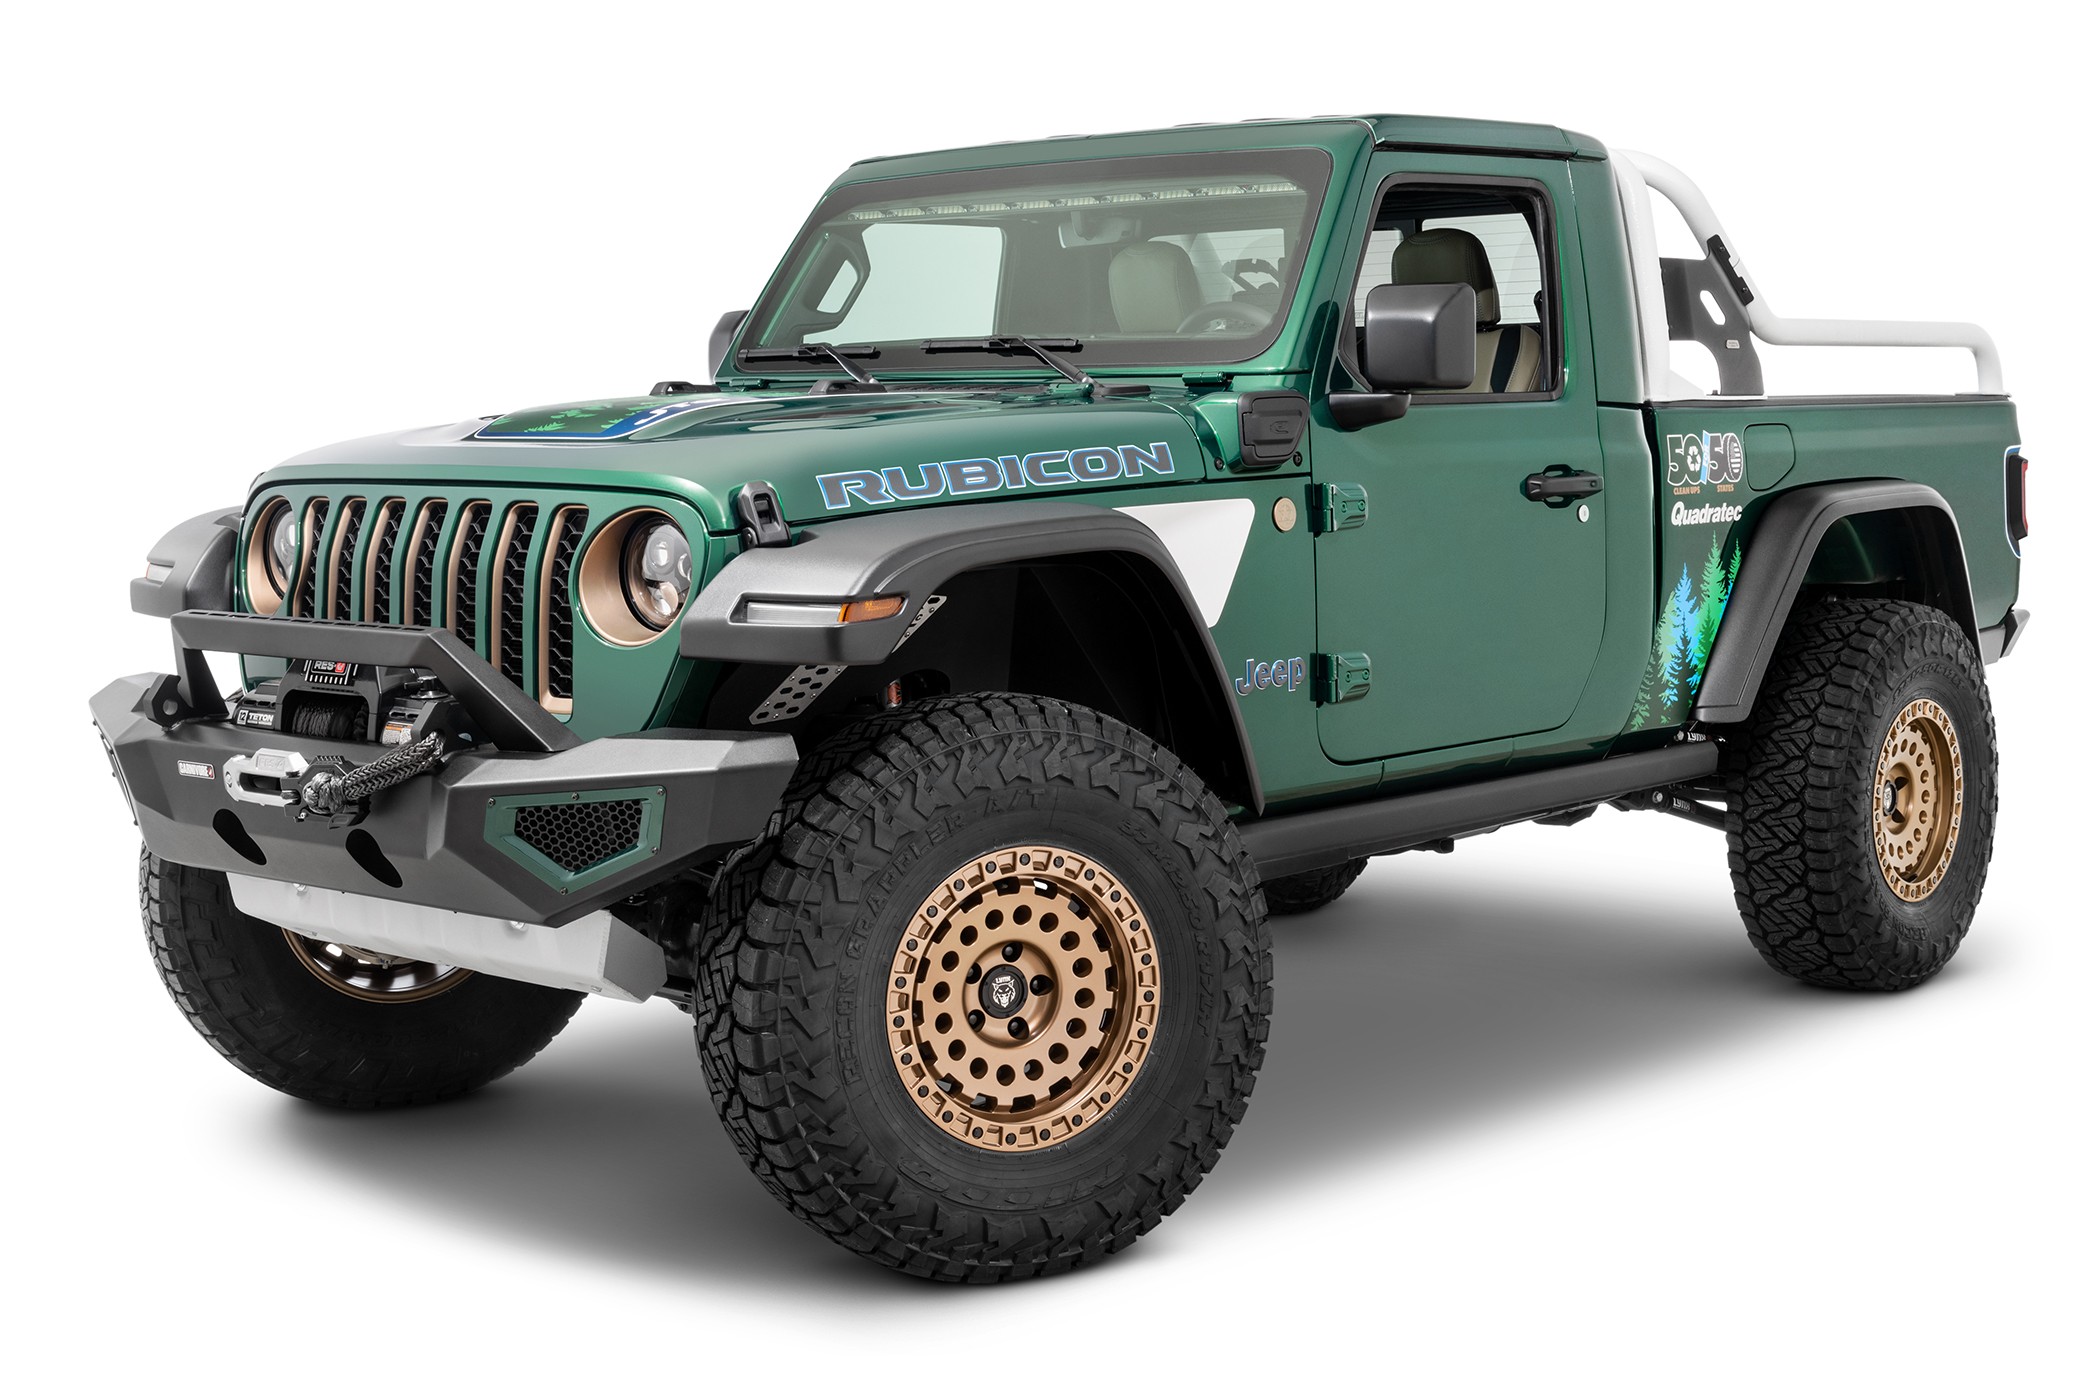 TwoDoor Jeep Gladiator ‘JTe’ Hybrid Is a Custom Trail Truck Built for